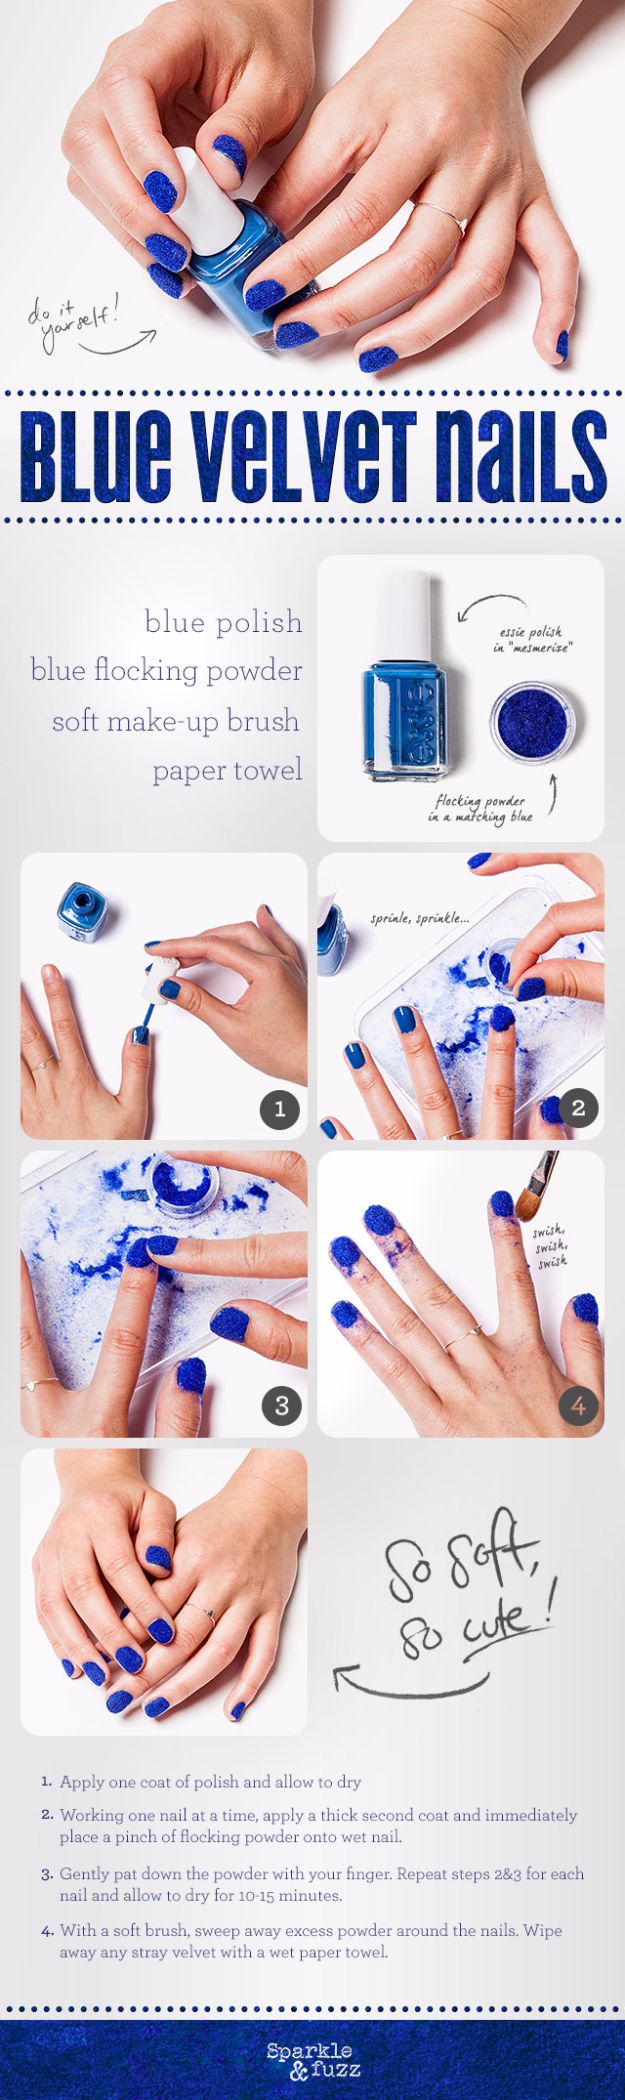 Easy Ways to Paint Nails - DIY Blue Velvet Nails - Quick Tips and Tricks for Manicures at Home - Nail Designs and Art Ideas for Simple DIY Pedicures and Manicure at Home - Hacks and Tutorials with Cool Step by Step Instructions and Tutorials - DIY Projects and Crafts by DIY JOY 